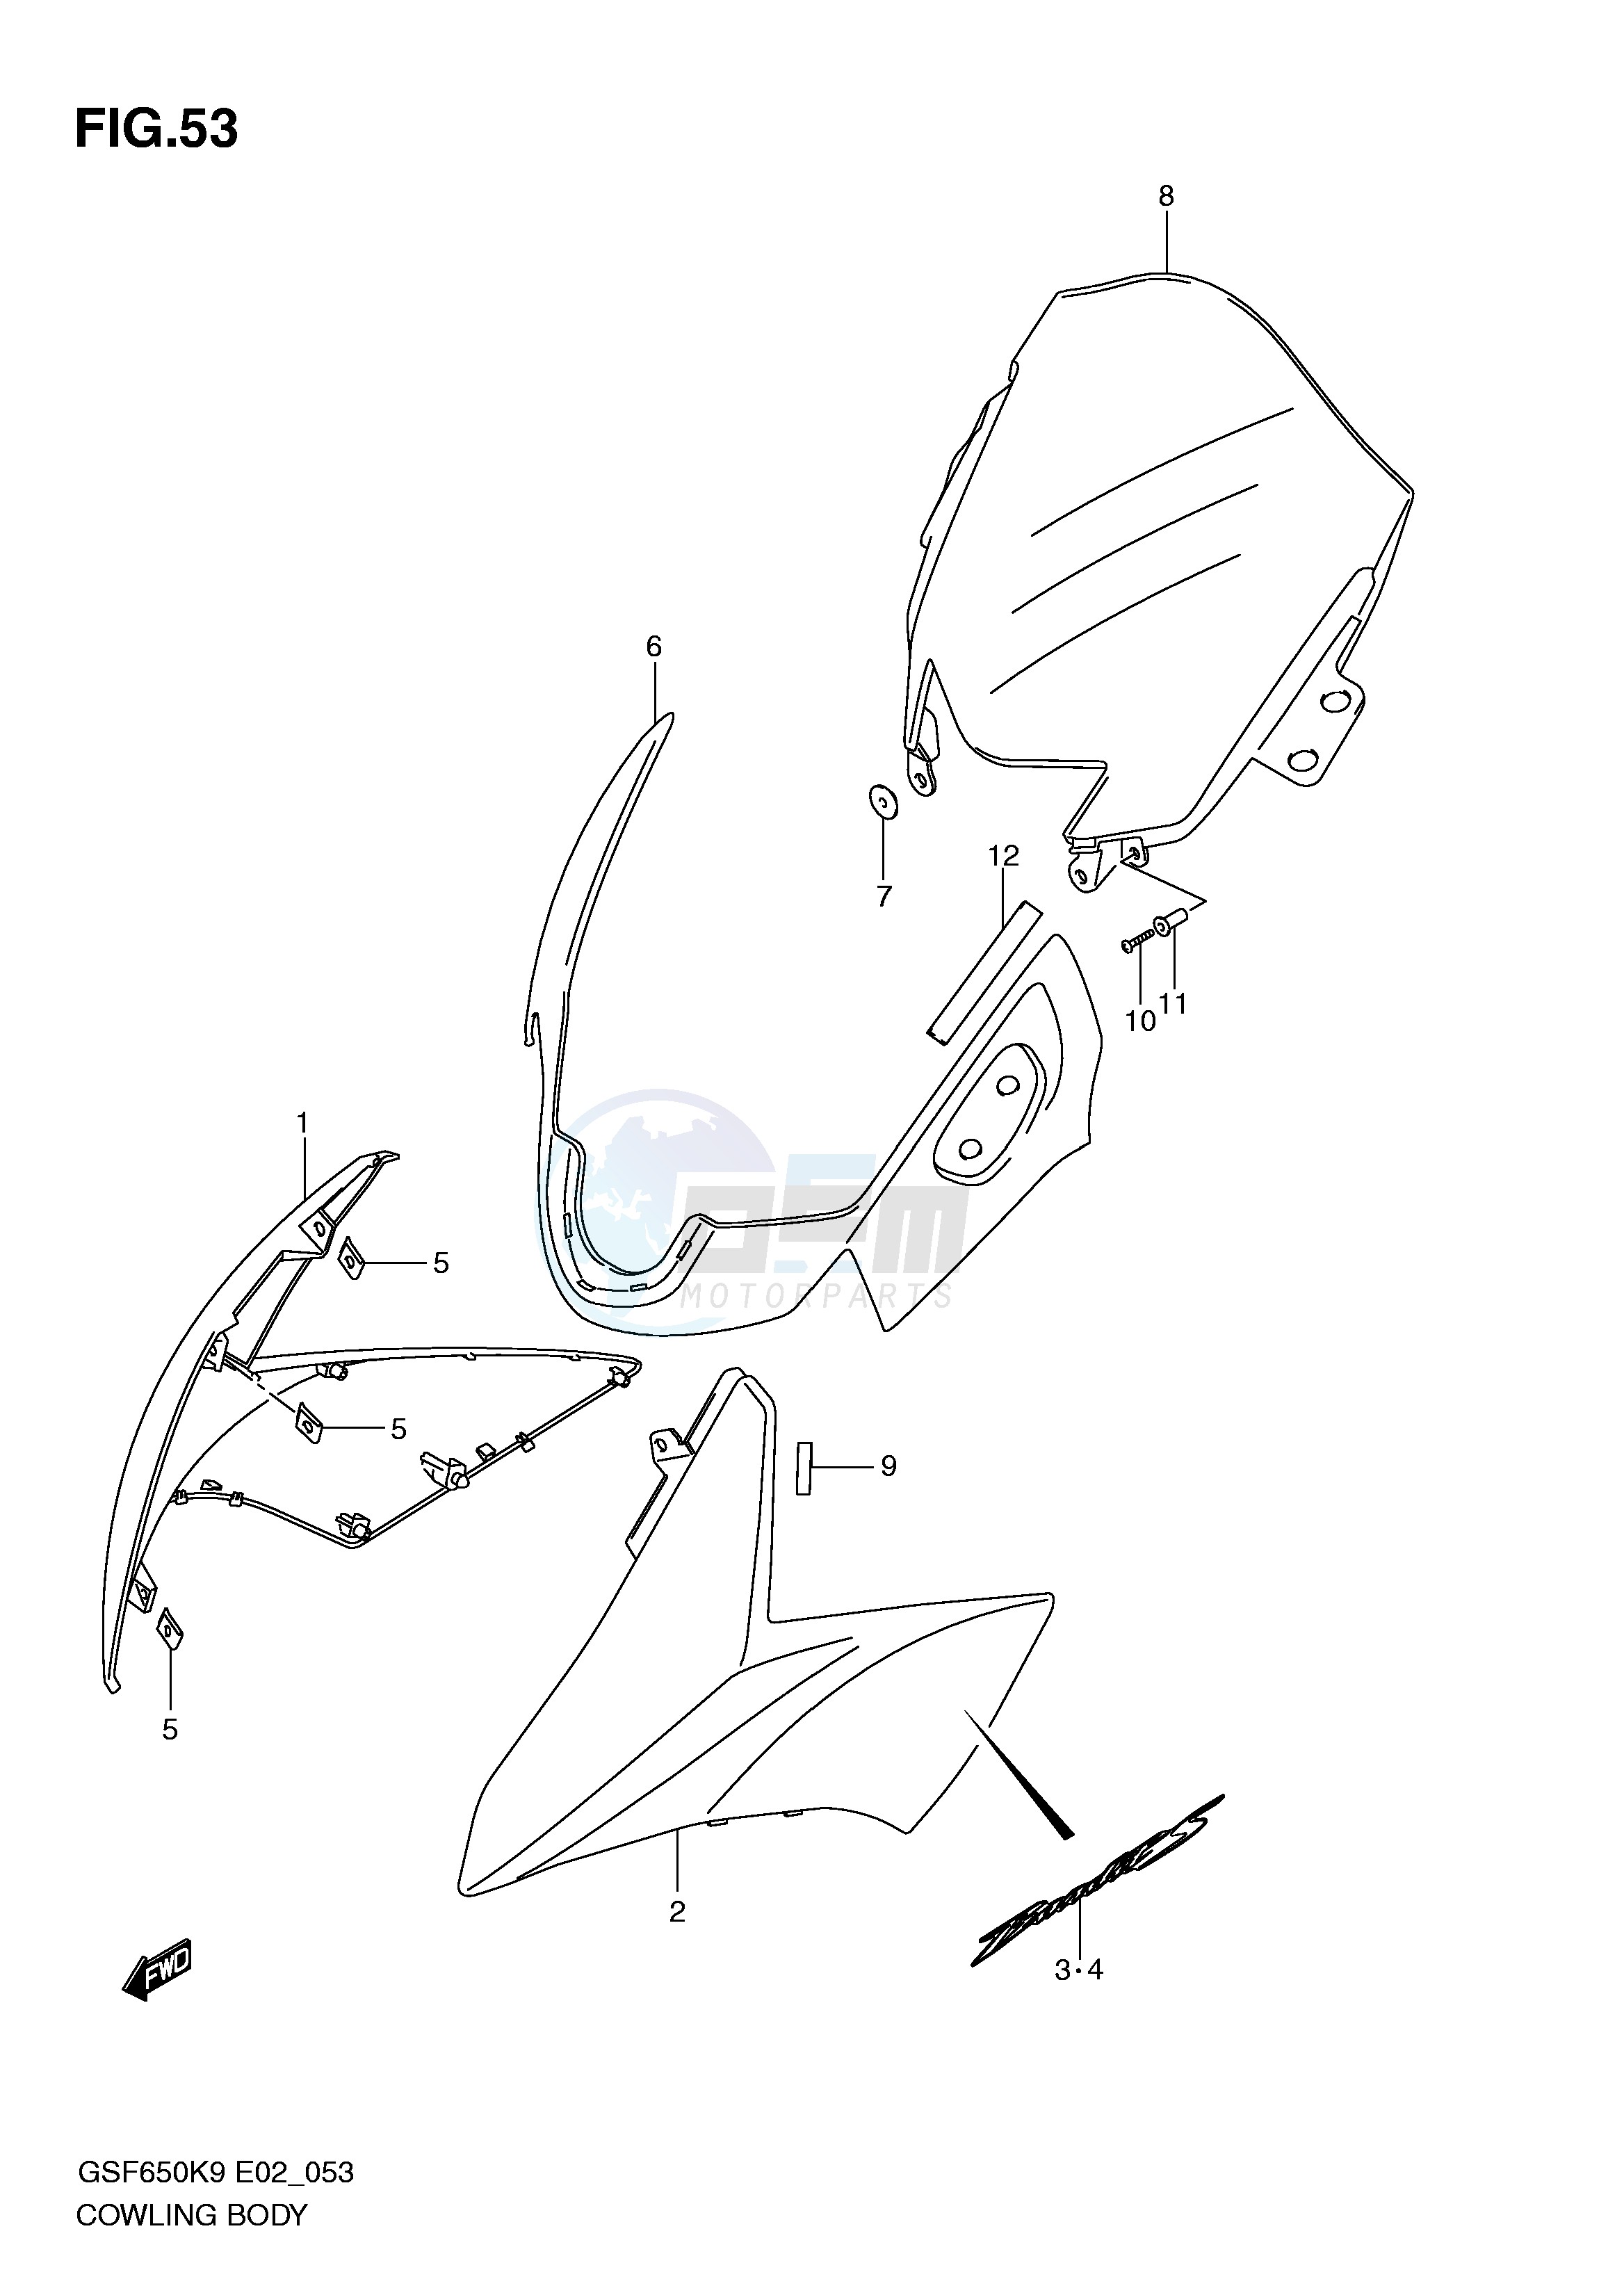 COWLING BODY (WITH COWLING) blueprint